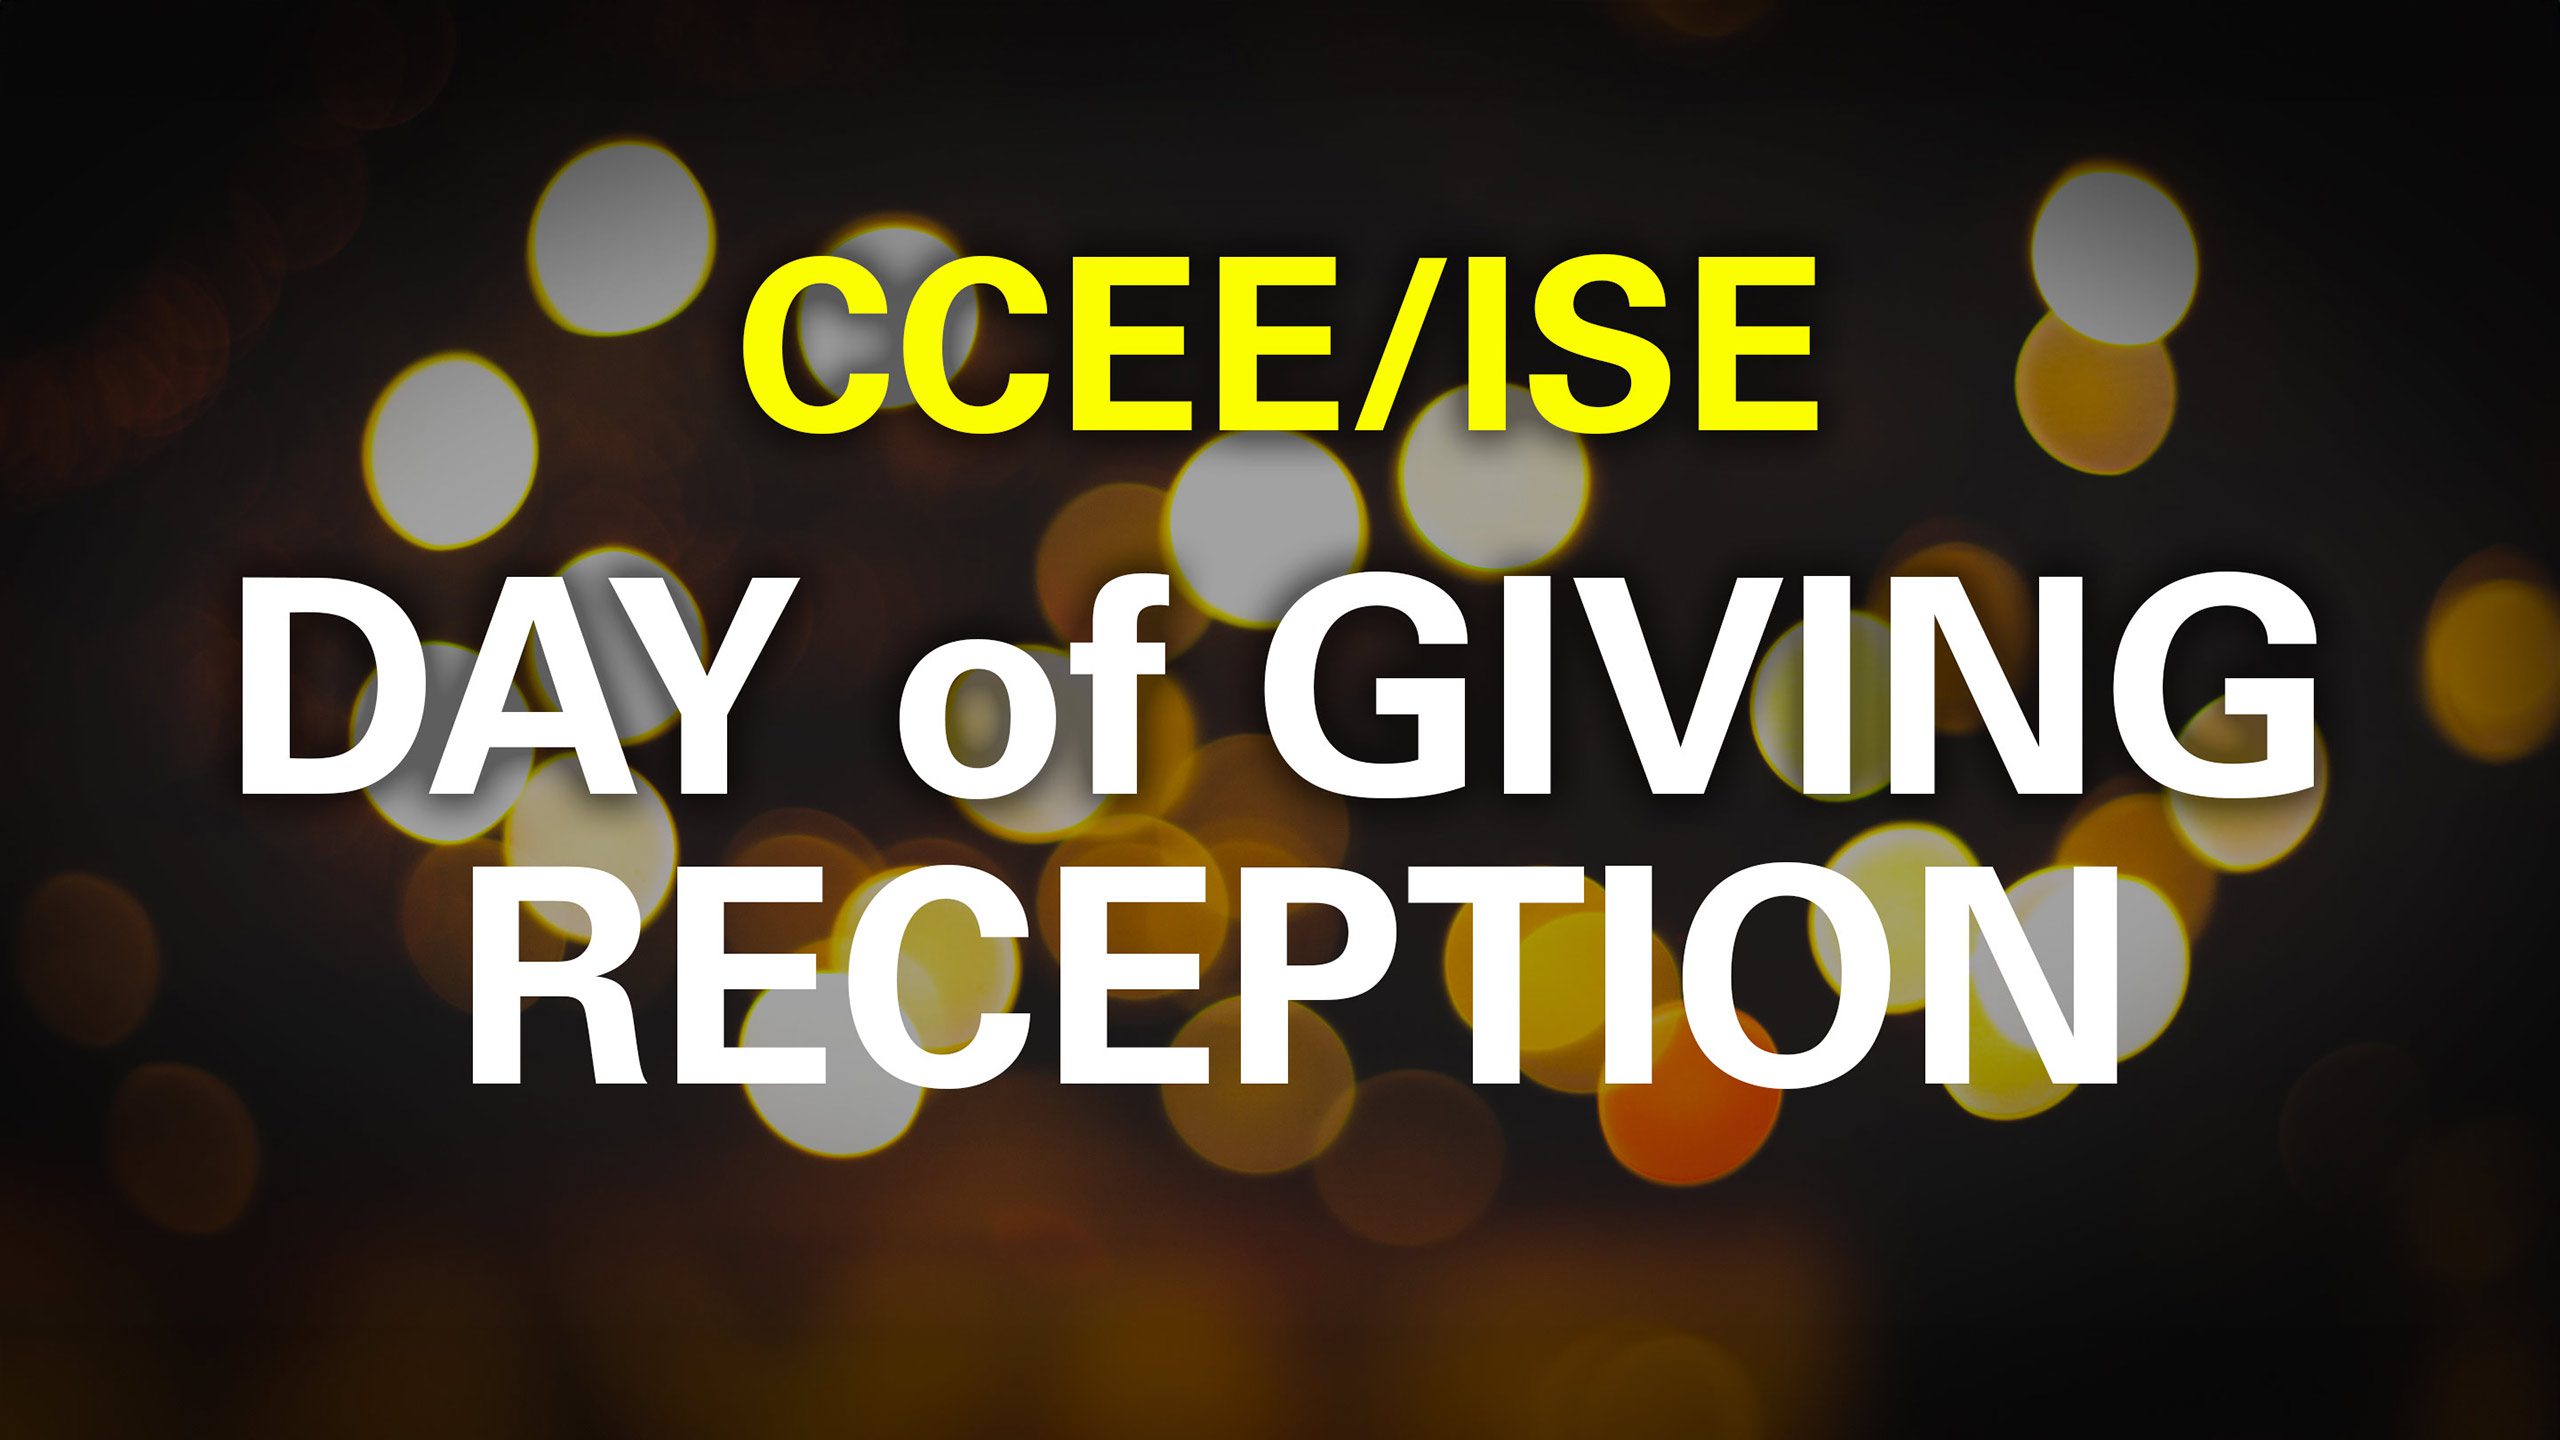 CCEE/ISE Day of Giving Reception